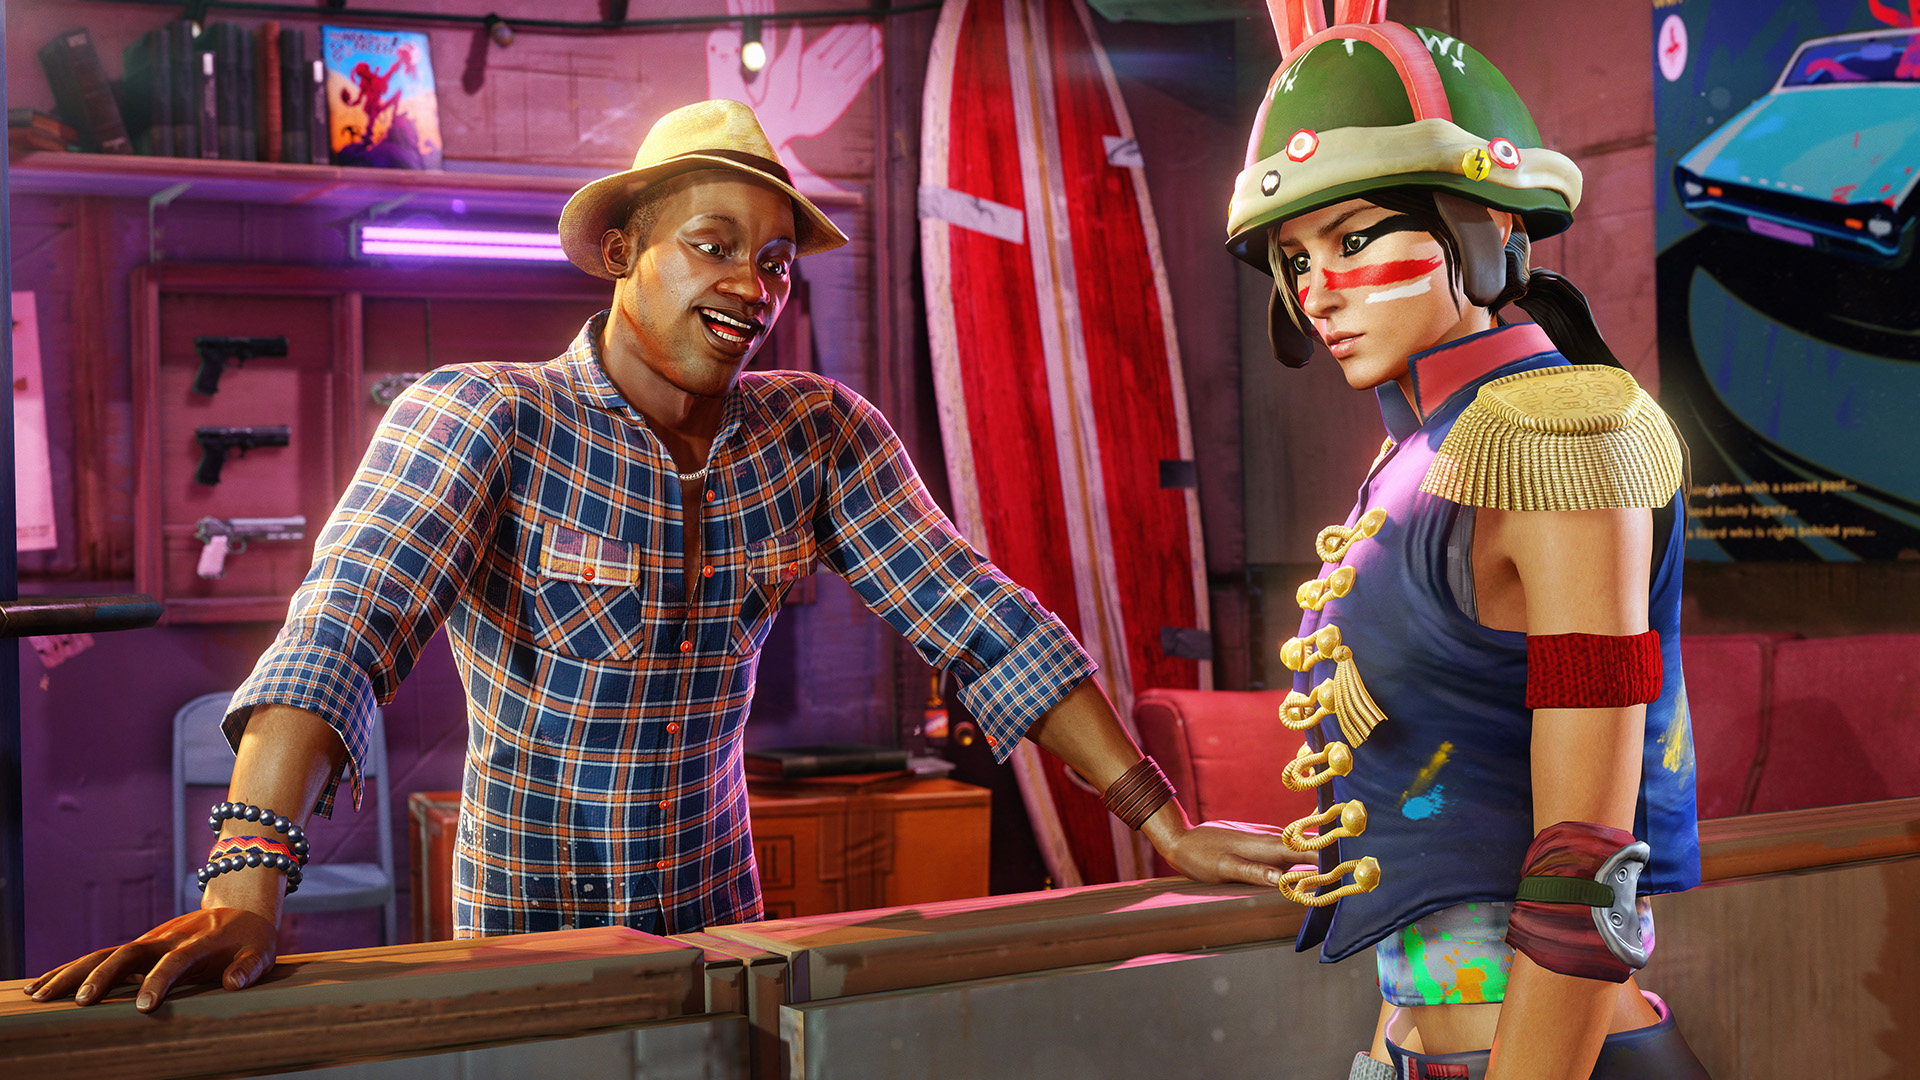 Sunset Overdrive' Review (Xbox One): The Floor Is Lava